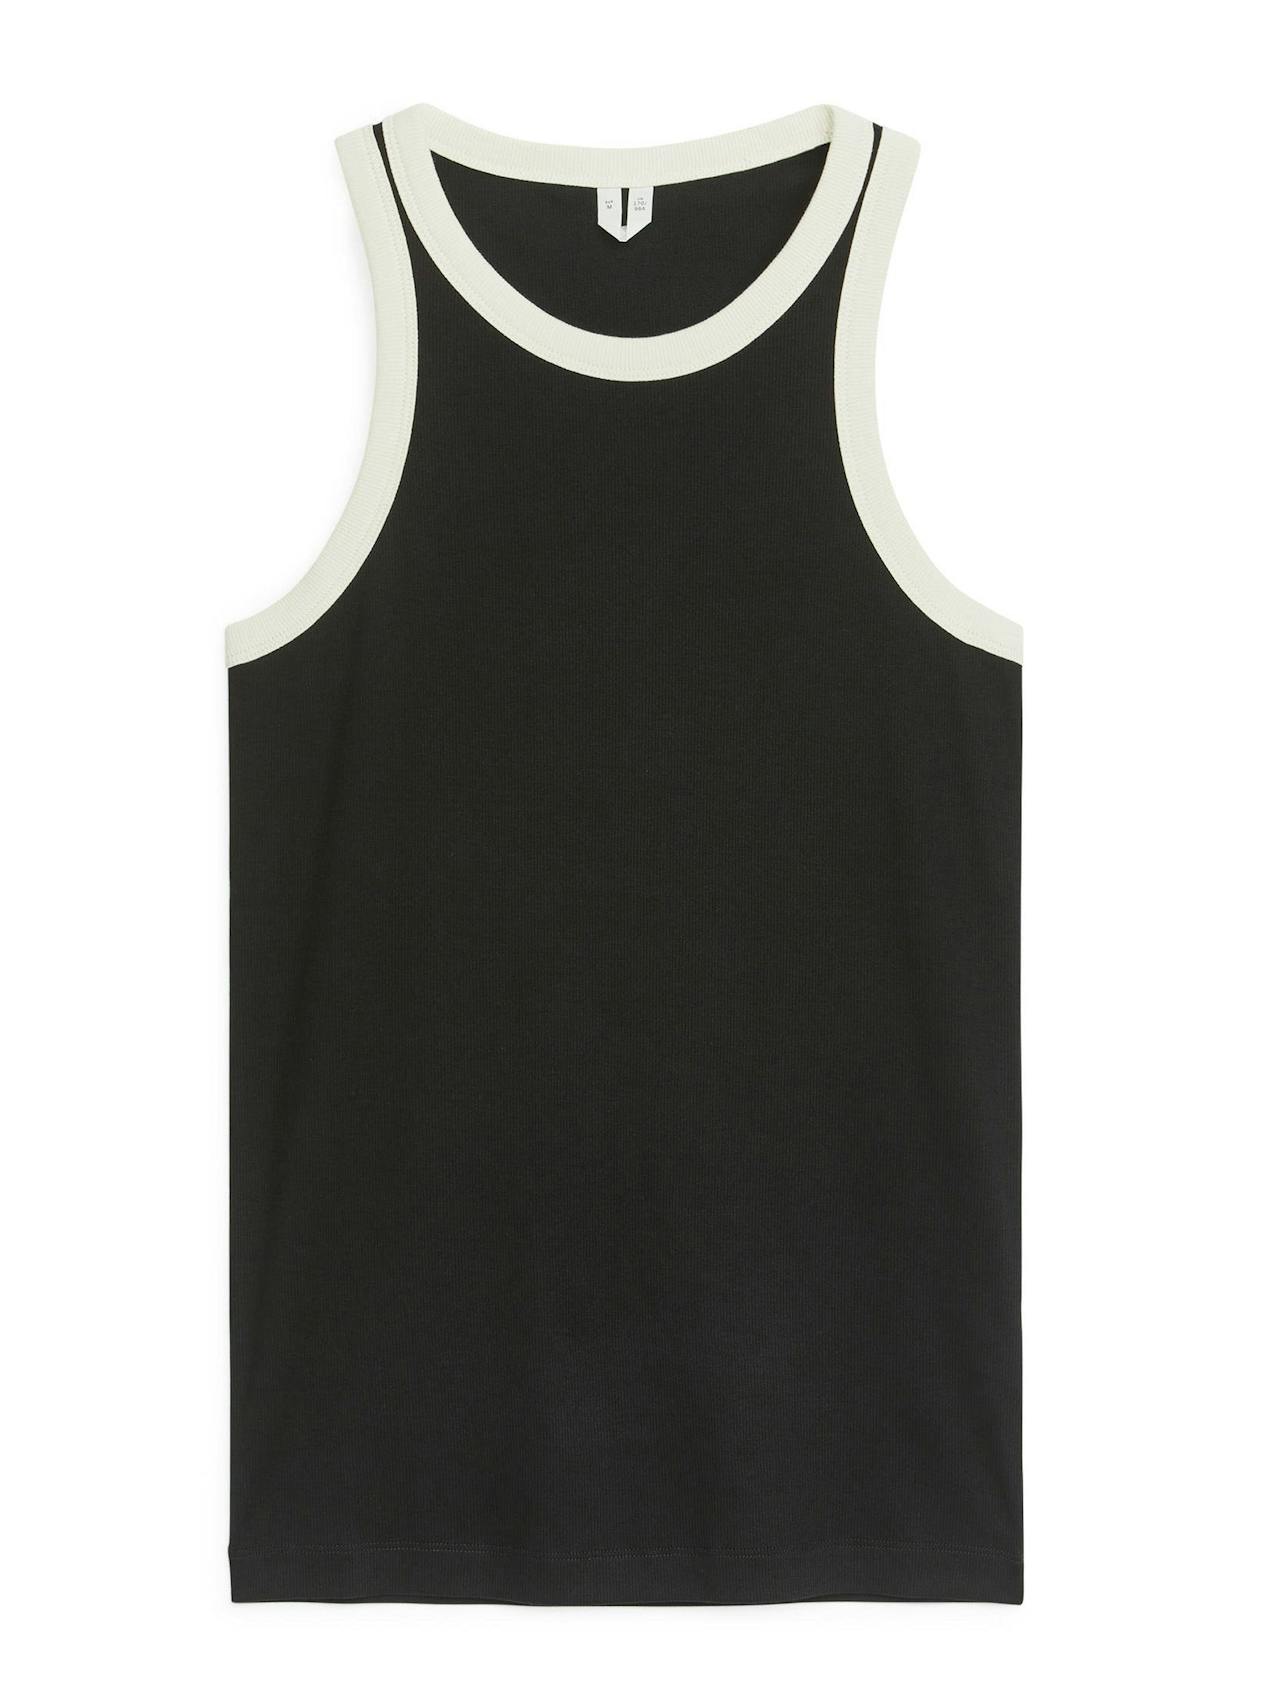 Rib racer tank top in black and off-white